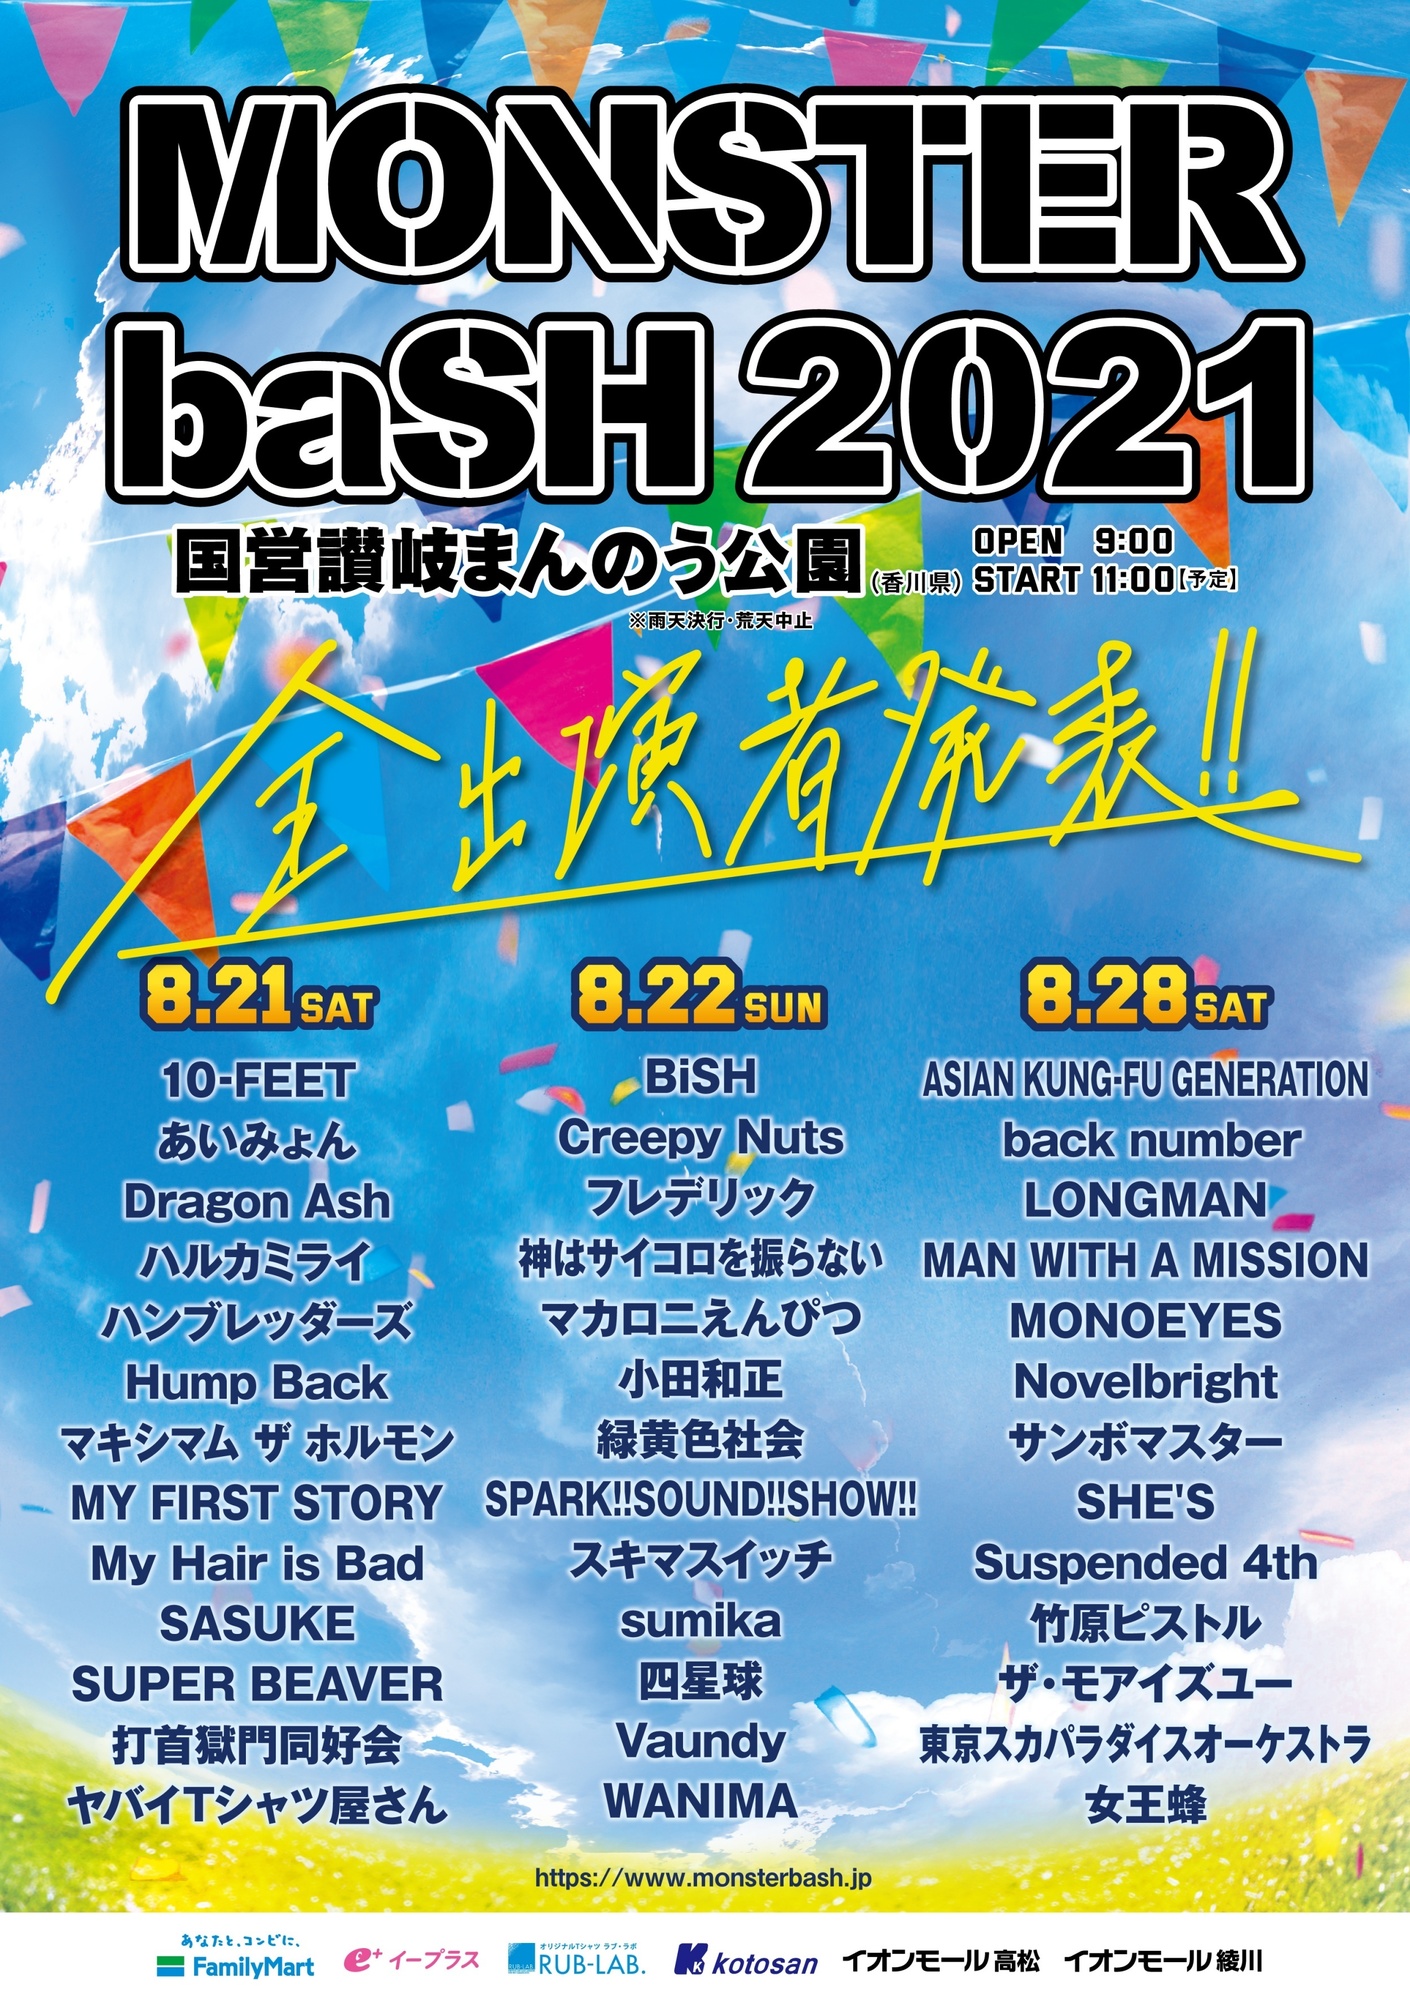 MONSTER baSHに出演決定！ | MAN WITH A MISSION